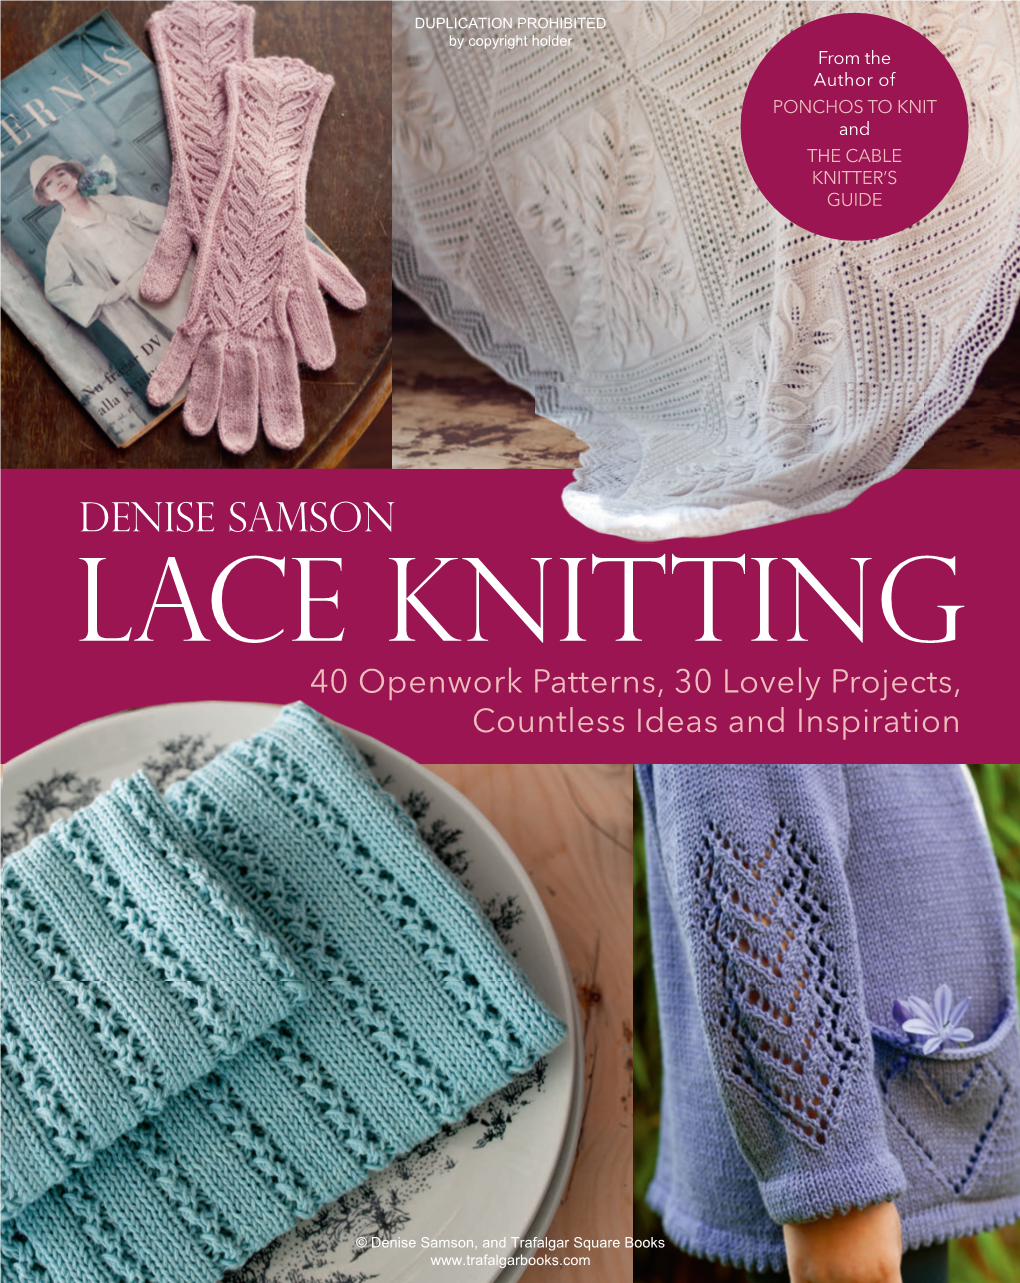 Lace Knitting Guide